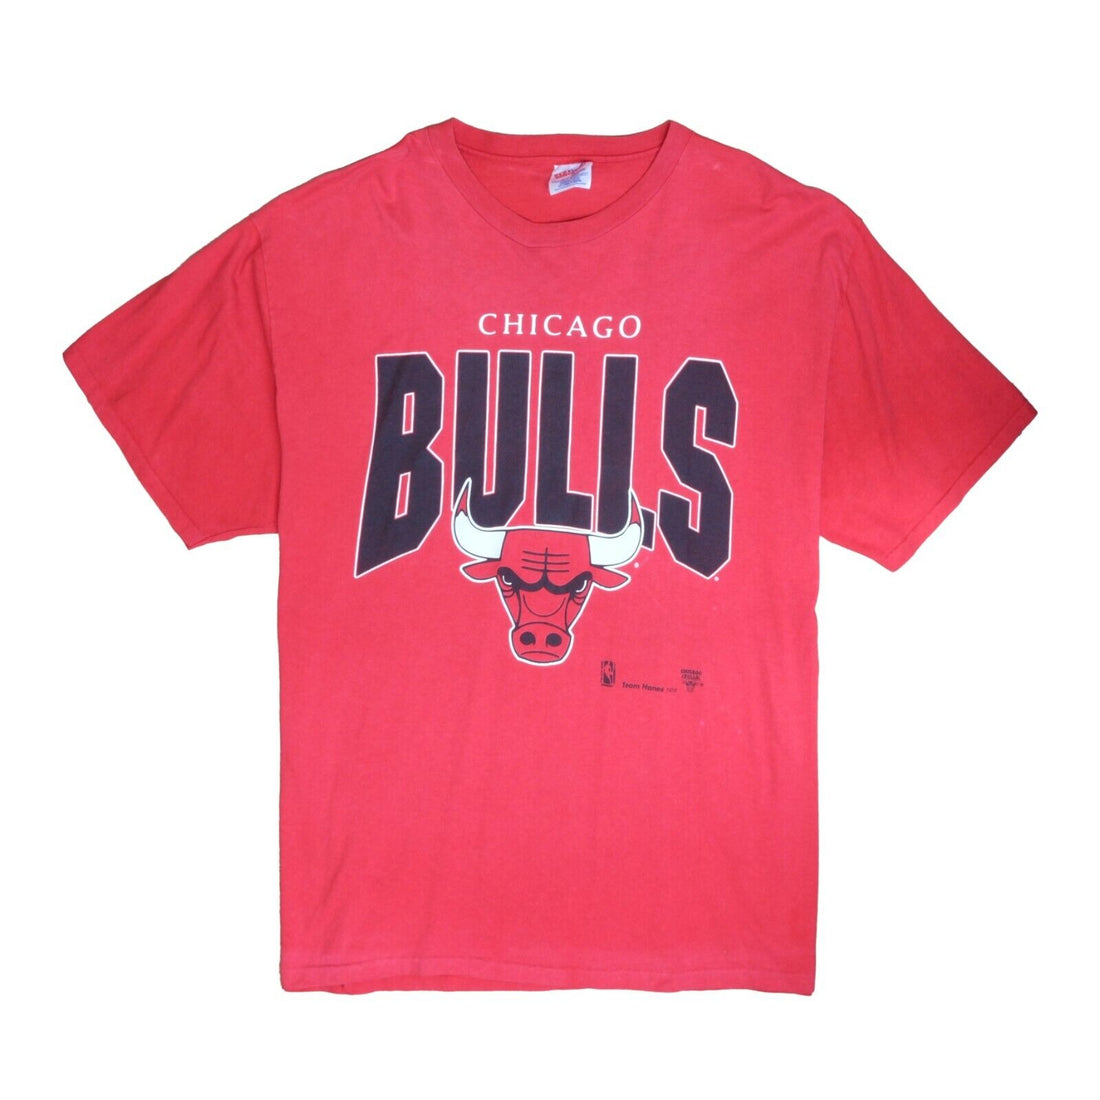 Vintage Chicago Bulls T-Shirt Size 2XL Red 90s NBA